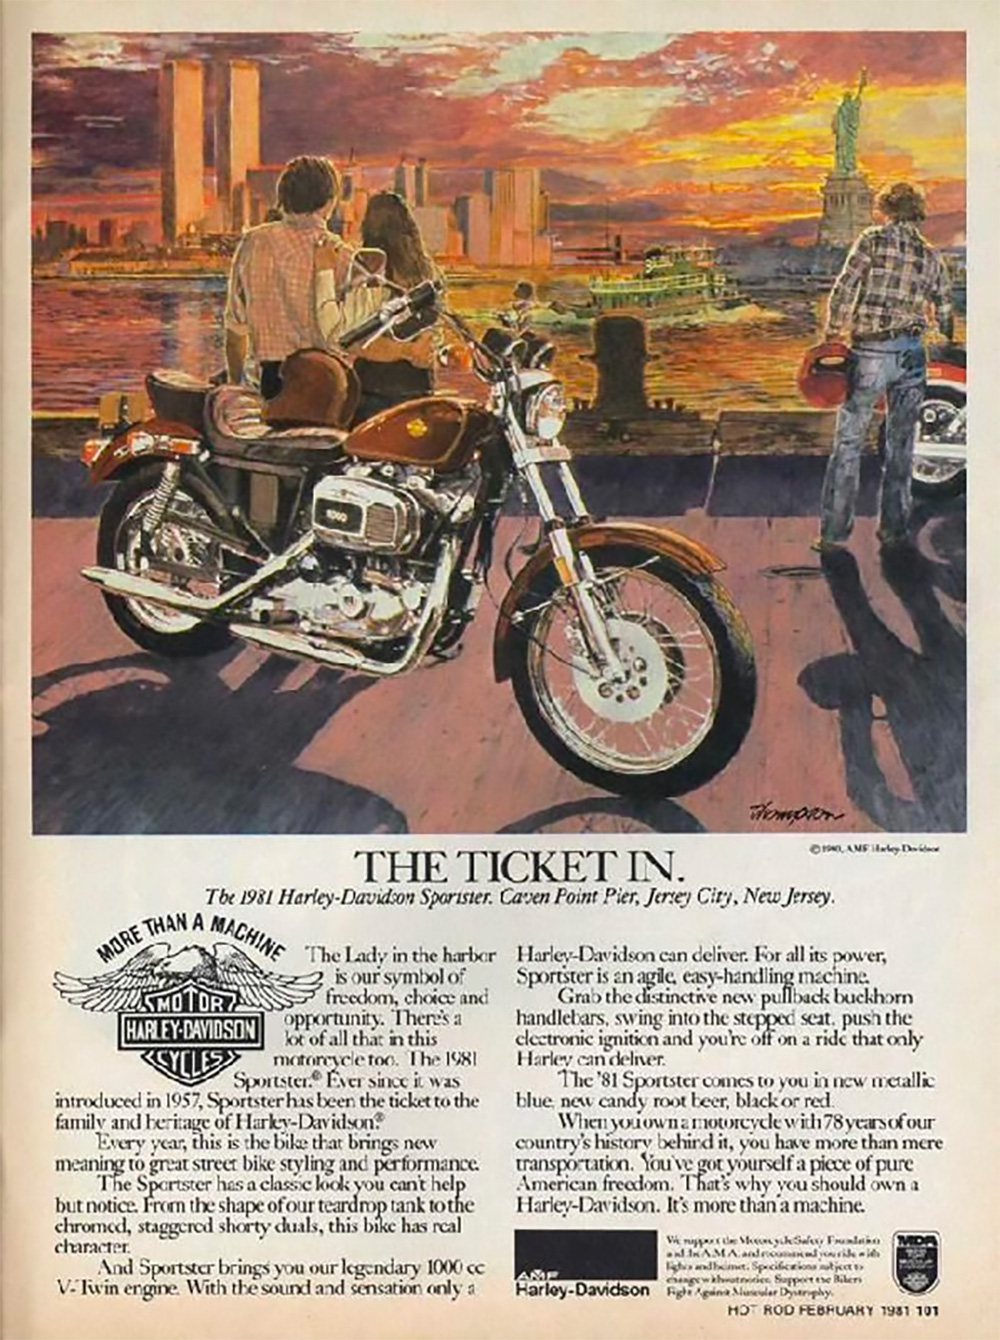 A Harley Sportster magazine ad from 1981